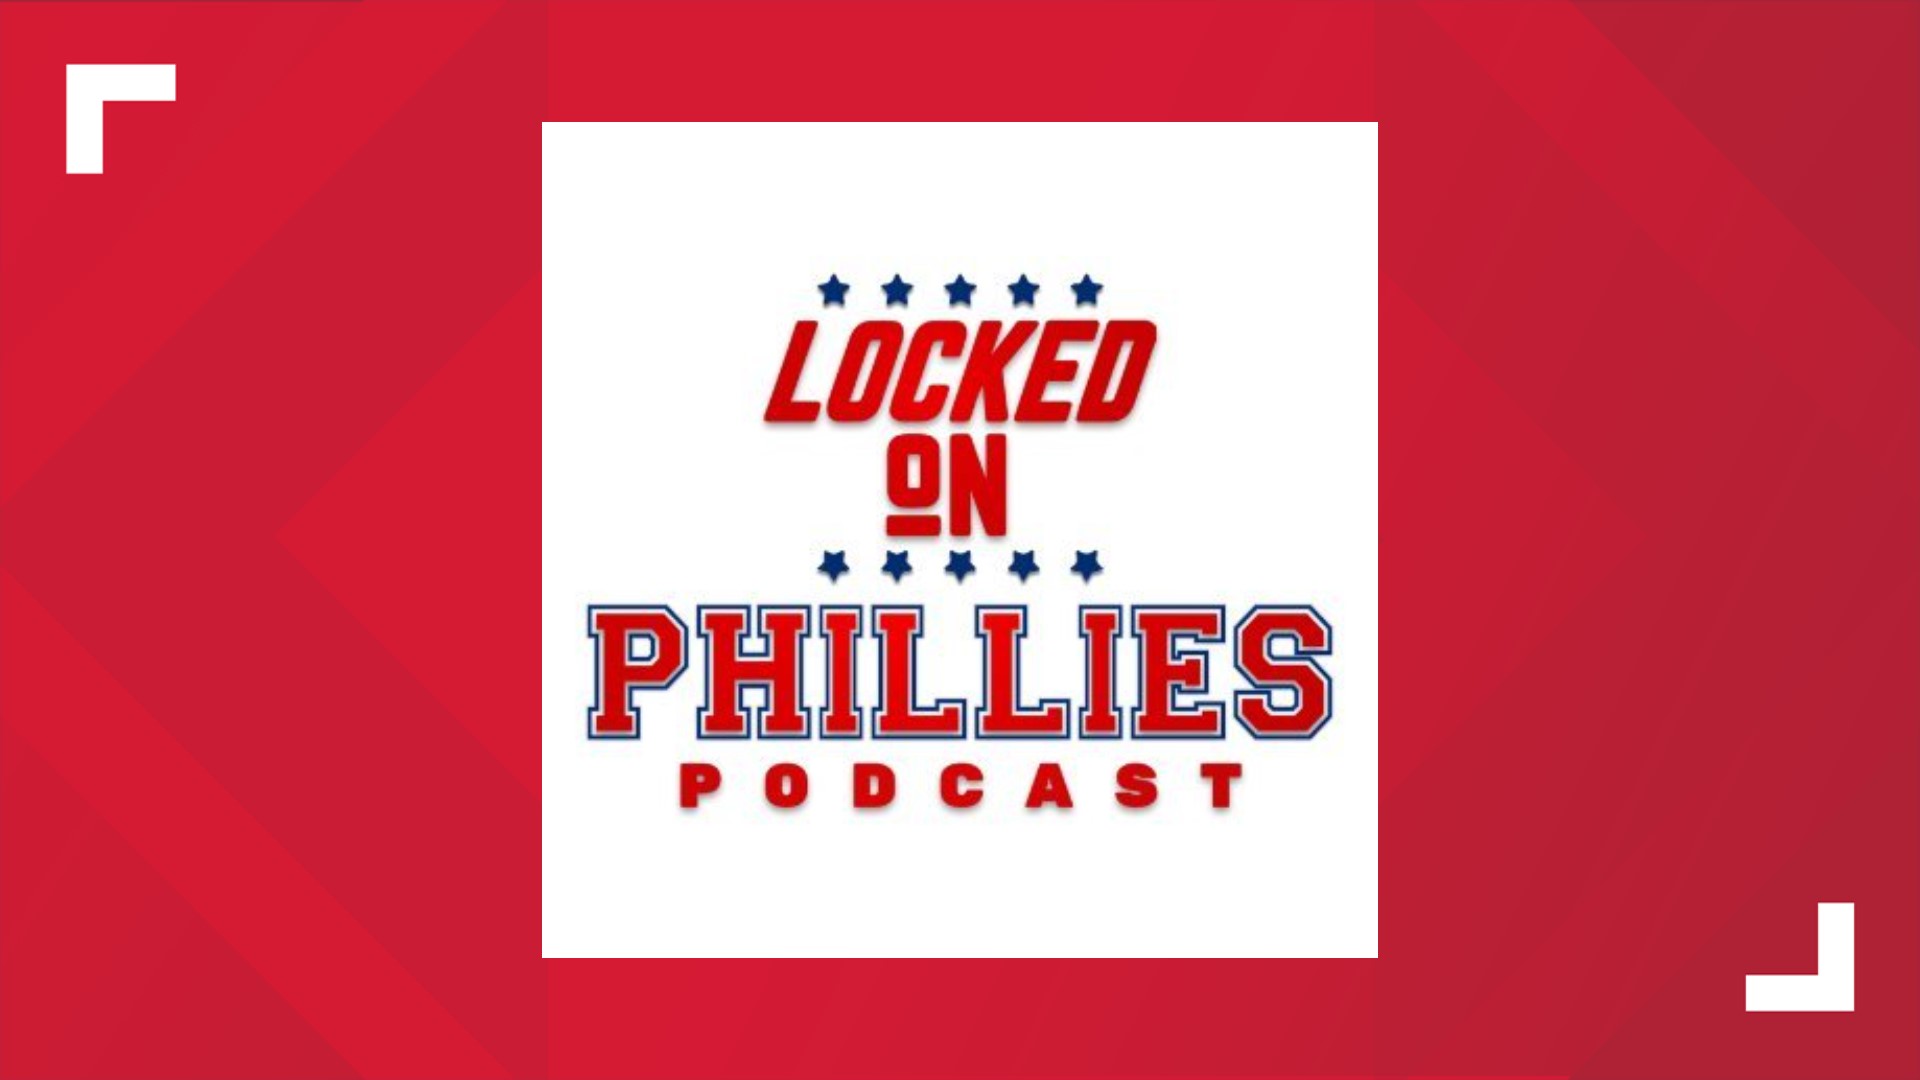 Locked On Phillies host Dan Wilson broke down the Phillies offseason moves so far, and what the MLB lockout might look like for fans.